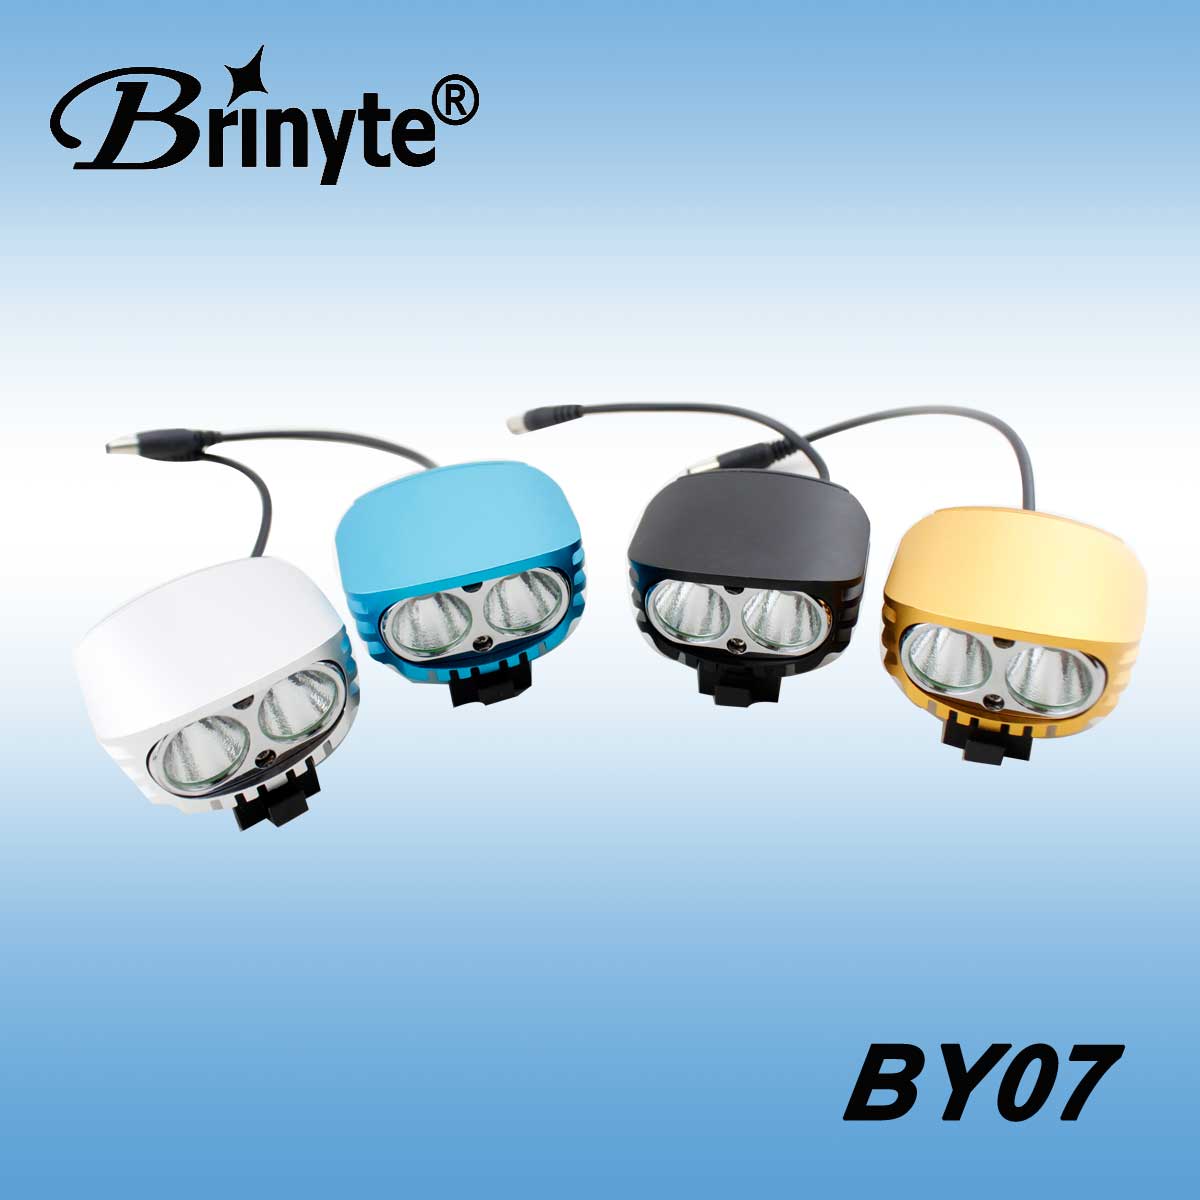 2014 New Product BY07 1000 Lumen China Wholesale CREE LED Bicycle Light